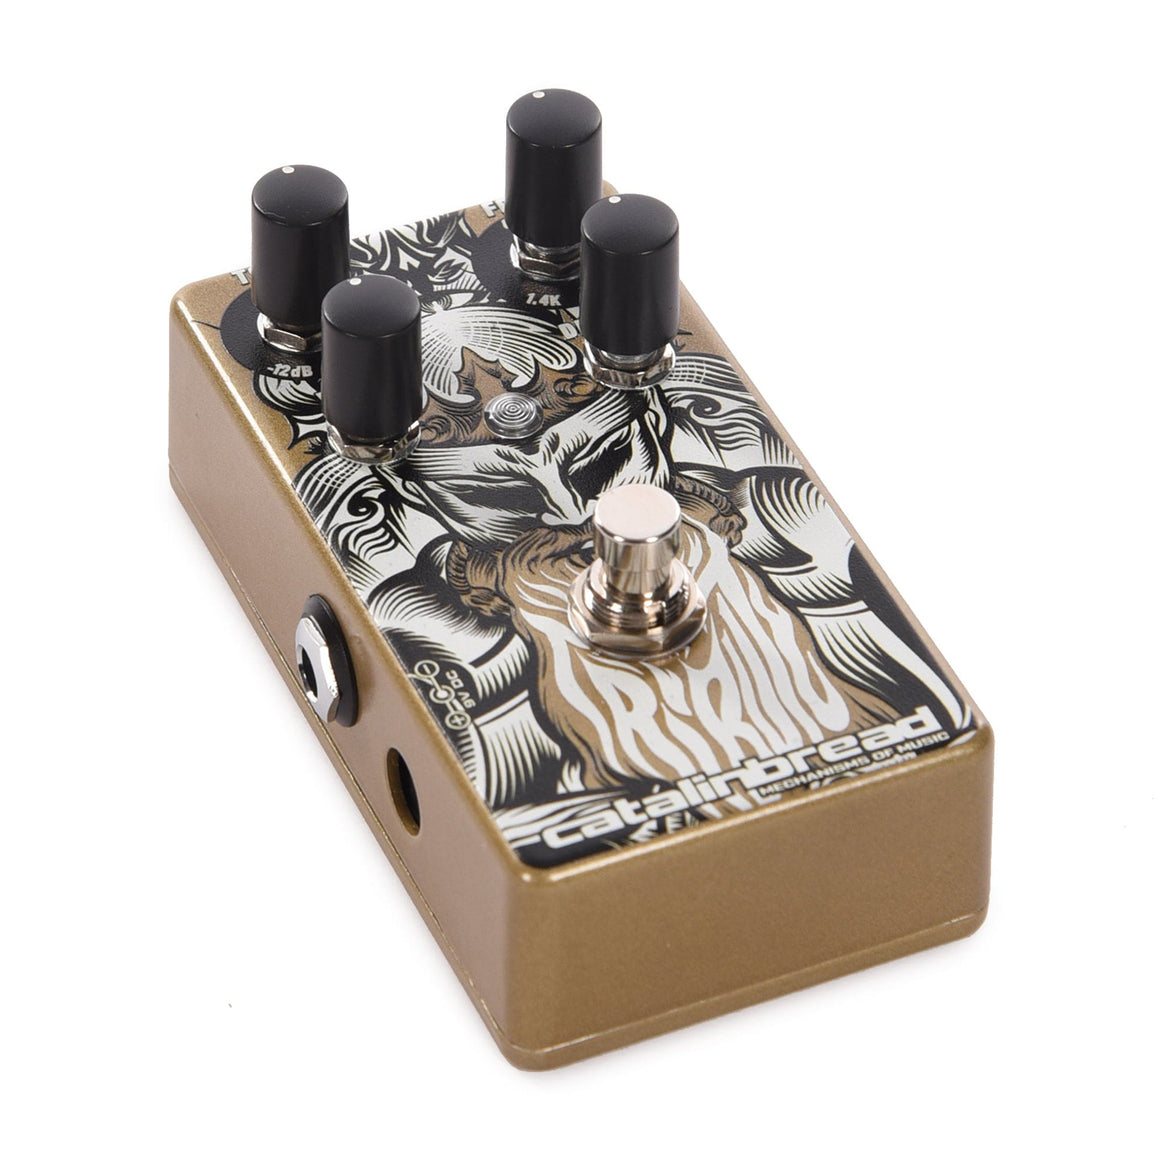 Catalinbread Tribute Low Gain Overdrive/Vari-O-Boost Pedal Effects and Pedals / Overdrive and Boost